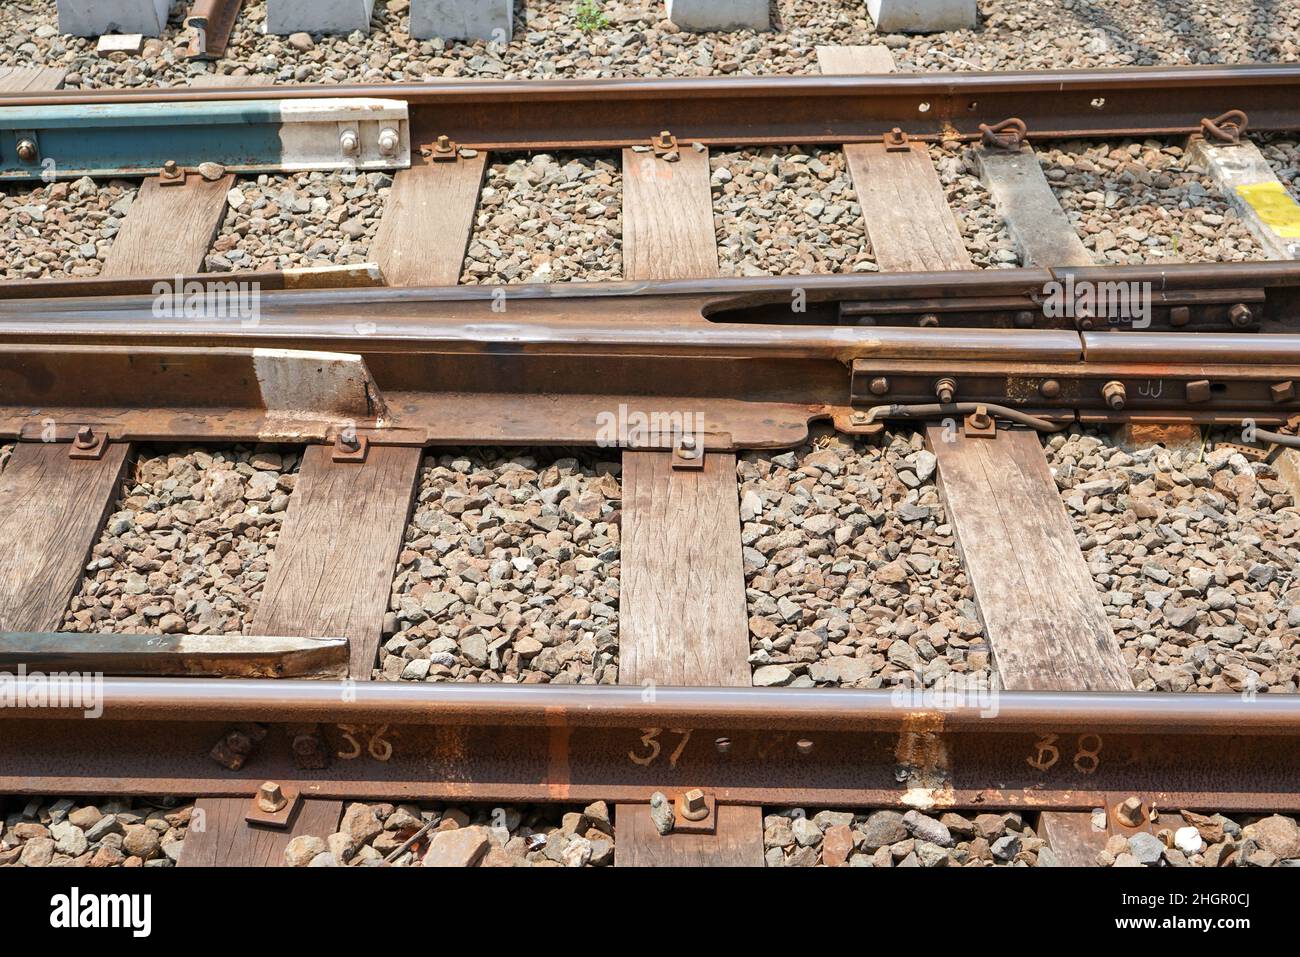 A railway track (British English and UIC terminology) or railroad track (American English), also known as permanent way or simply track, is the struct Stock Photo